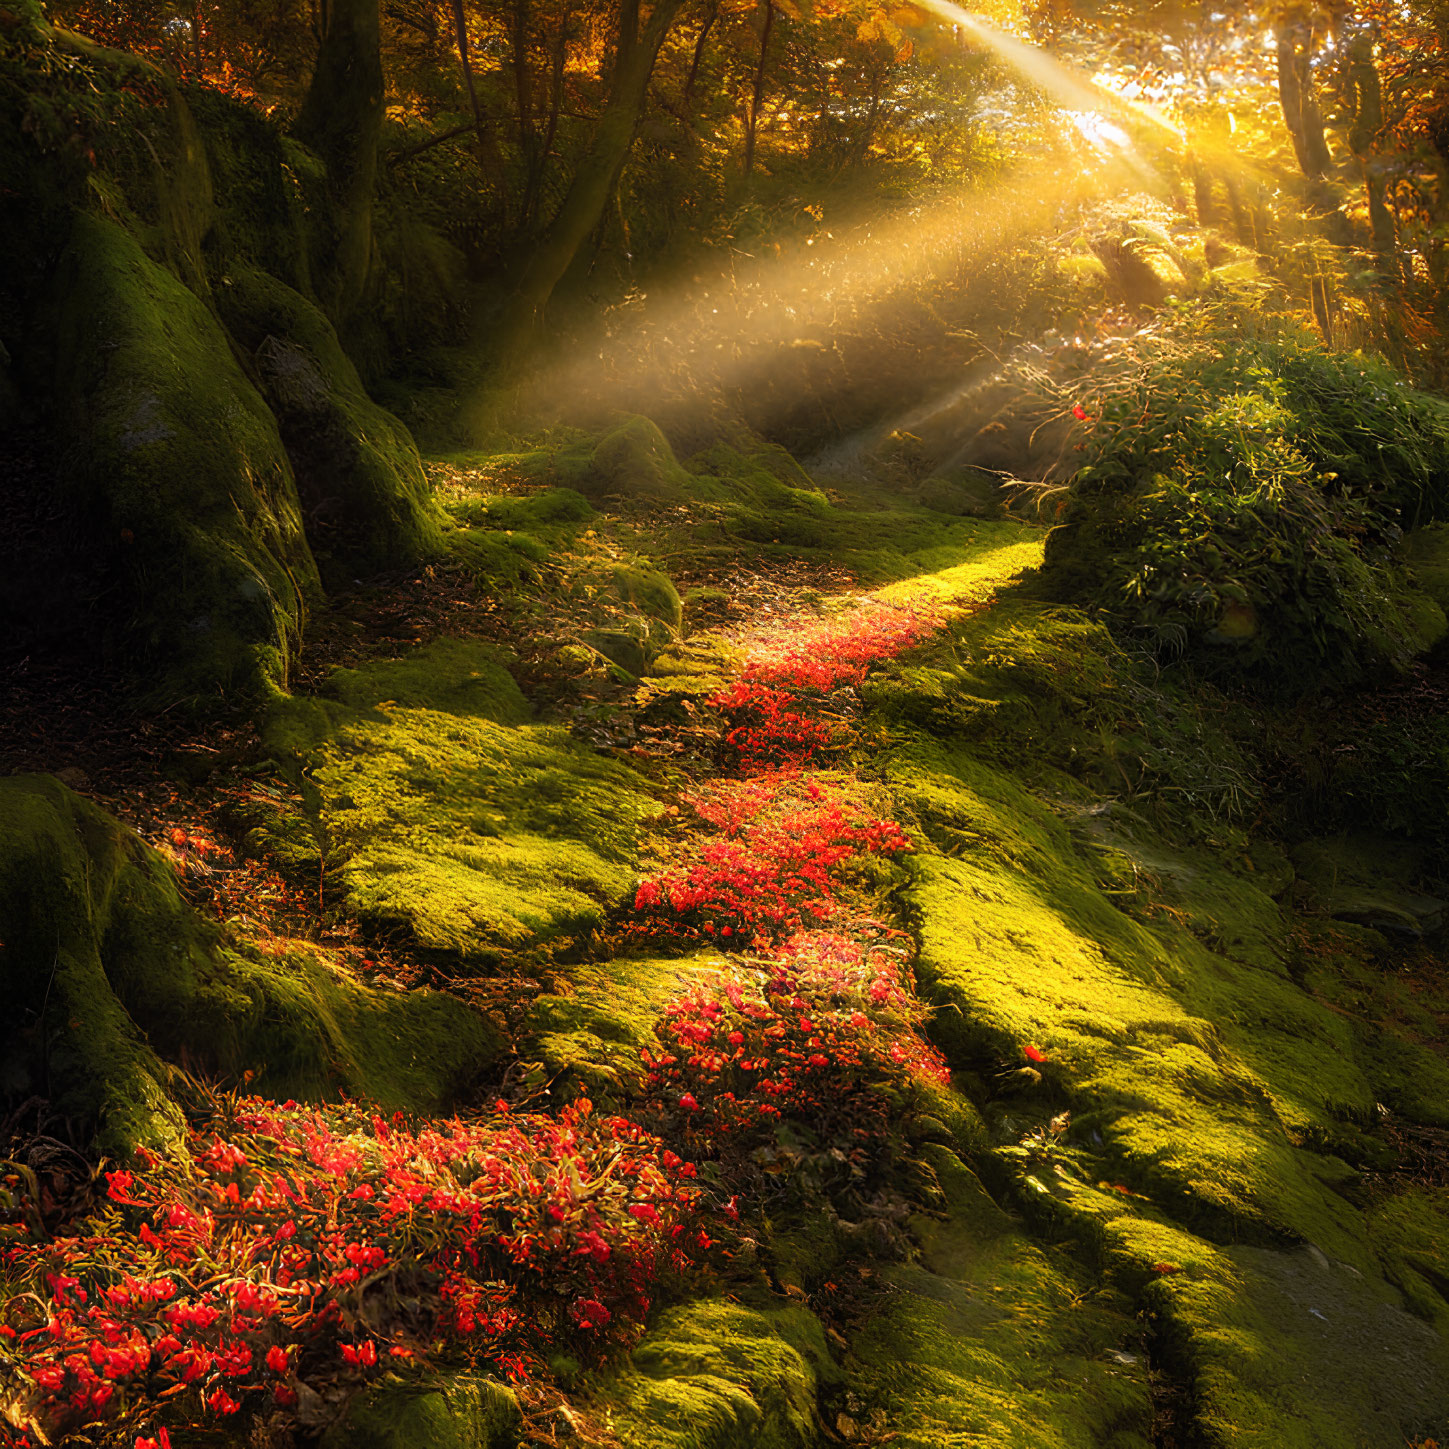 Sunlight filtering through trees onto moss-covered forest floor with red leaves